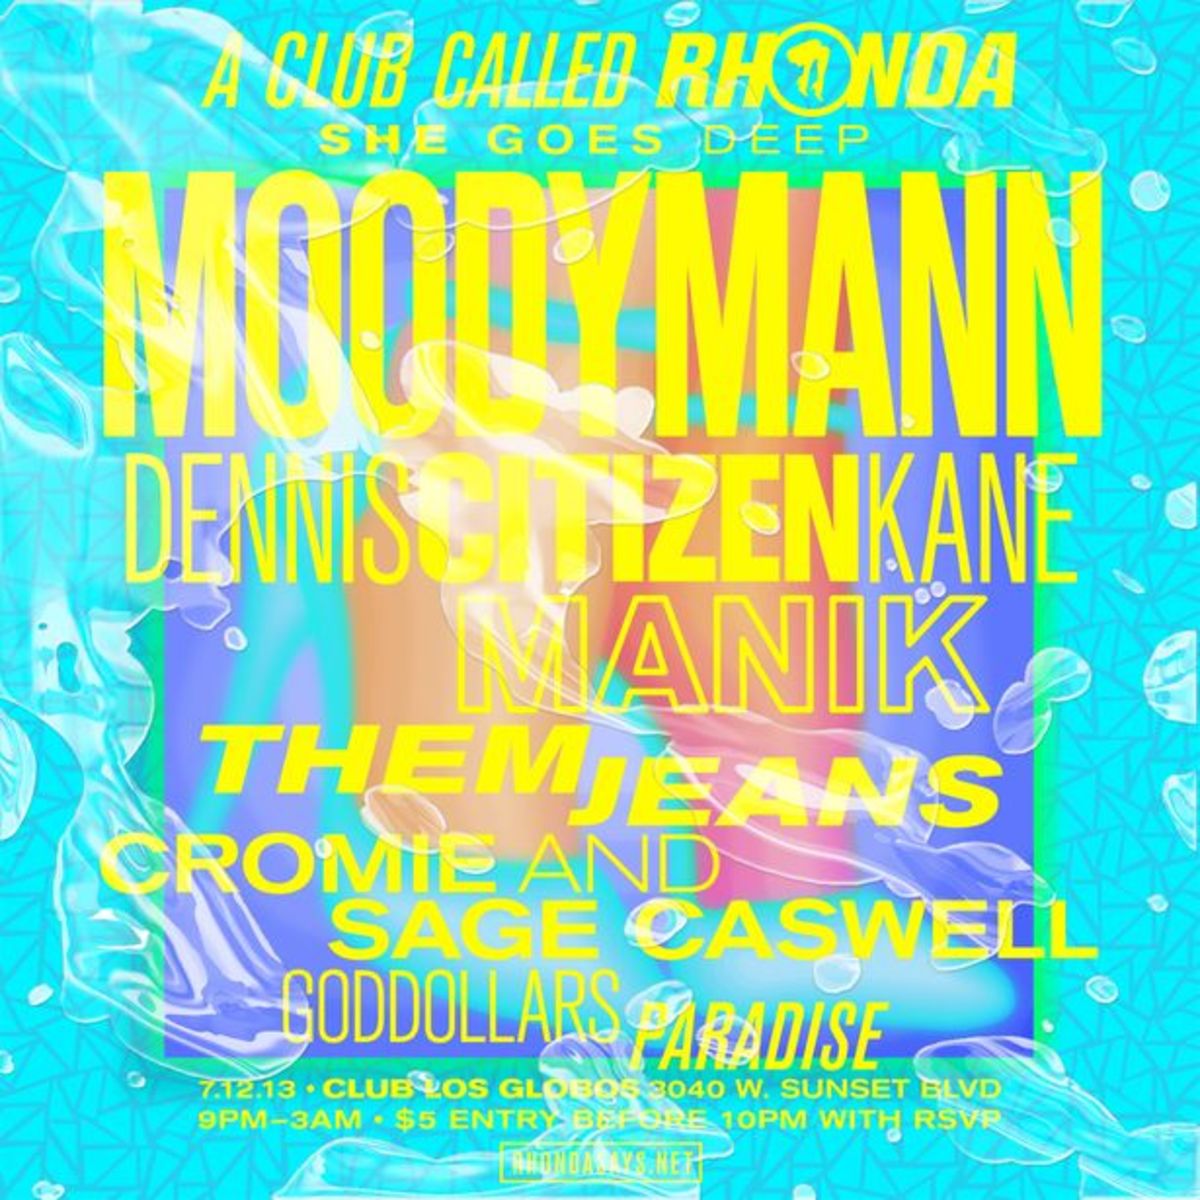 EDM Event: Moodyman, Dennis Citizen Kane, Manik, Them Jeans And More At A Club Called Rhonda